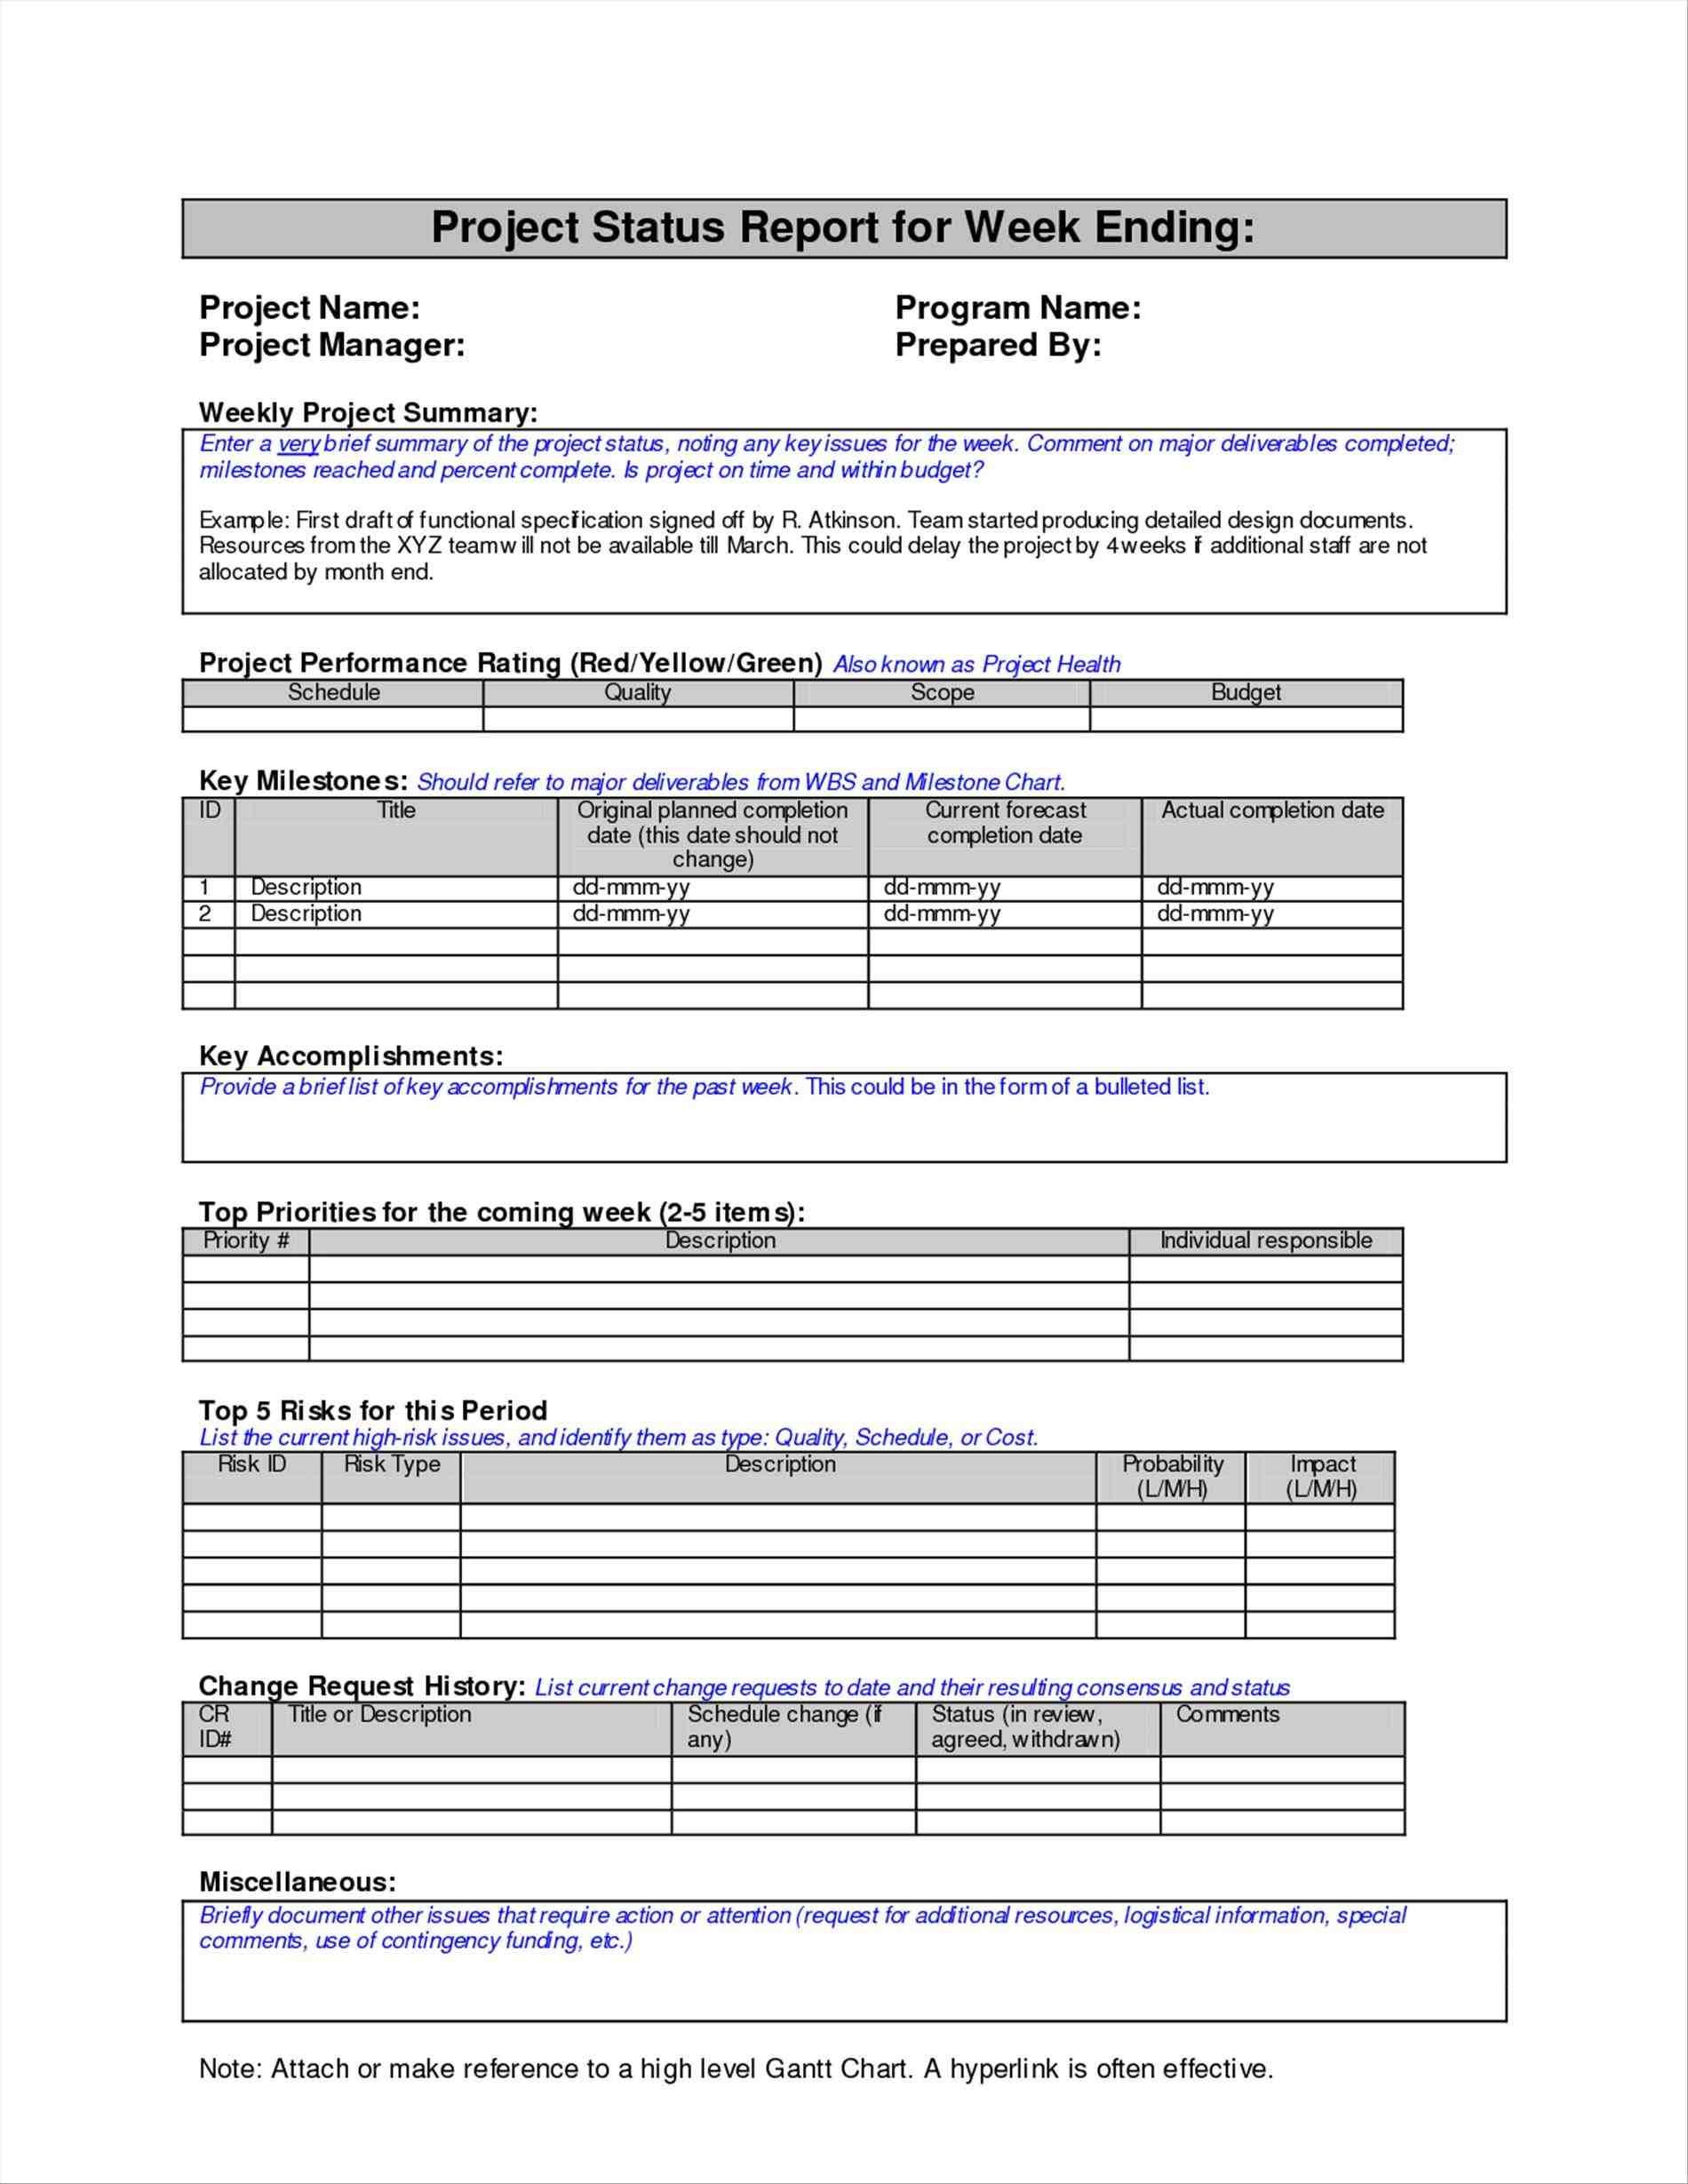 New Post Interior Design Project Timeline Visit Bobayule With Staff Progress Report Template